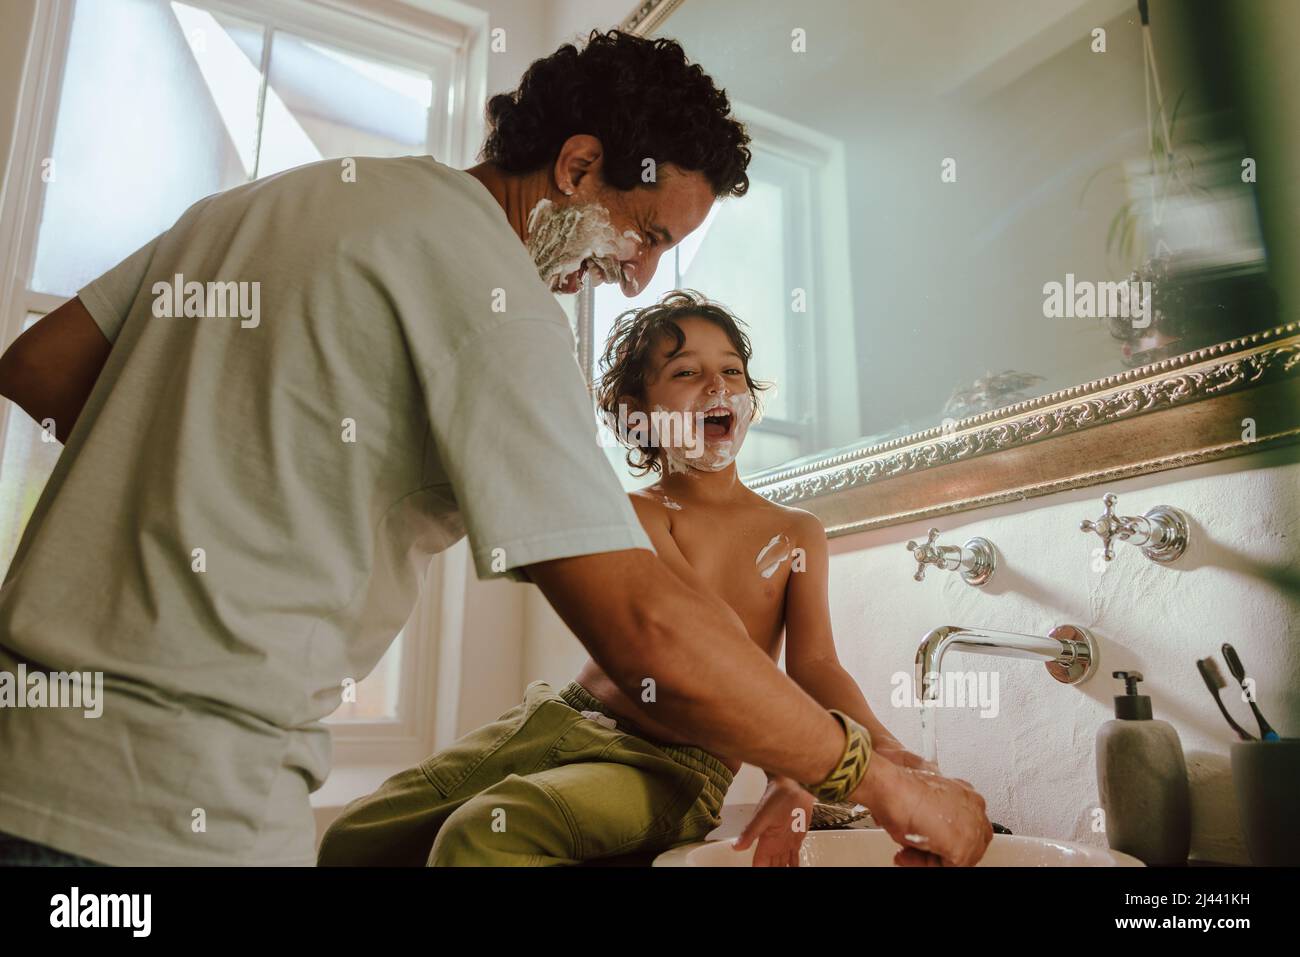 Cheerful father and son having fun with shaving foam in the bathroom. Father and son laughing happily with shaving cream on their faces. Loving father Stock Photo